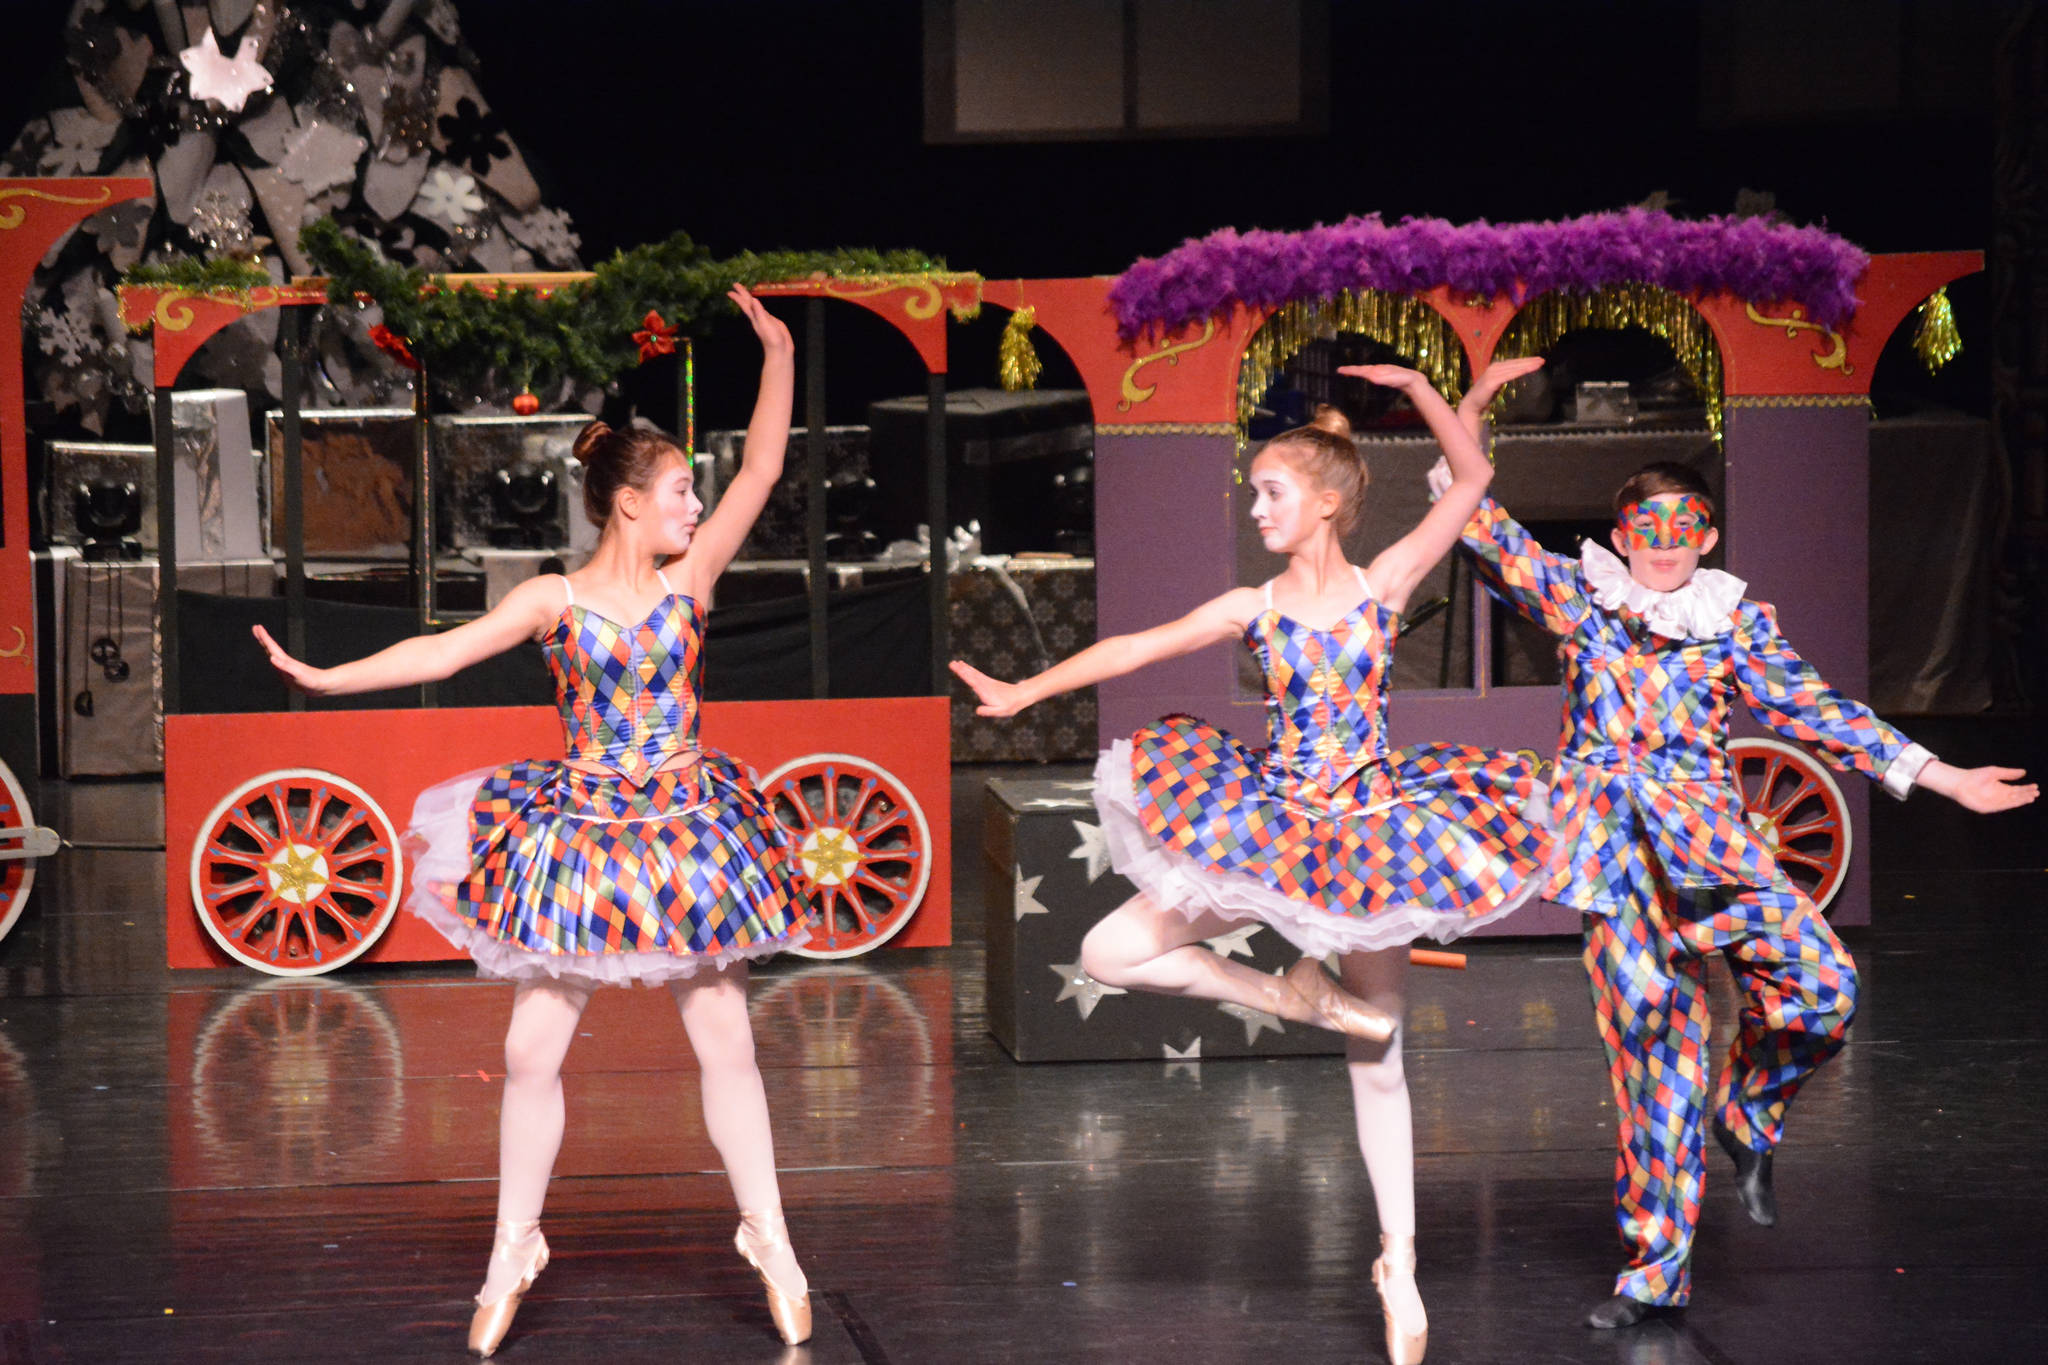 Serena Funkhauser, Ava Halstead and Lance Seneff as the harlequin toys rhearse a scene at the Mariner Theatre Nov. 24 in Homer for the Nutcracker Ballet. (Photo by Michael Armstrong, Homer News)